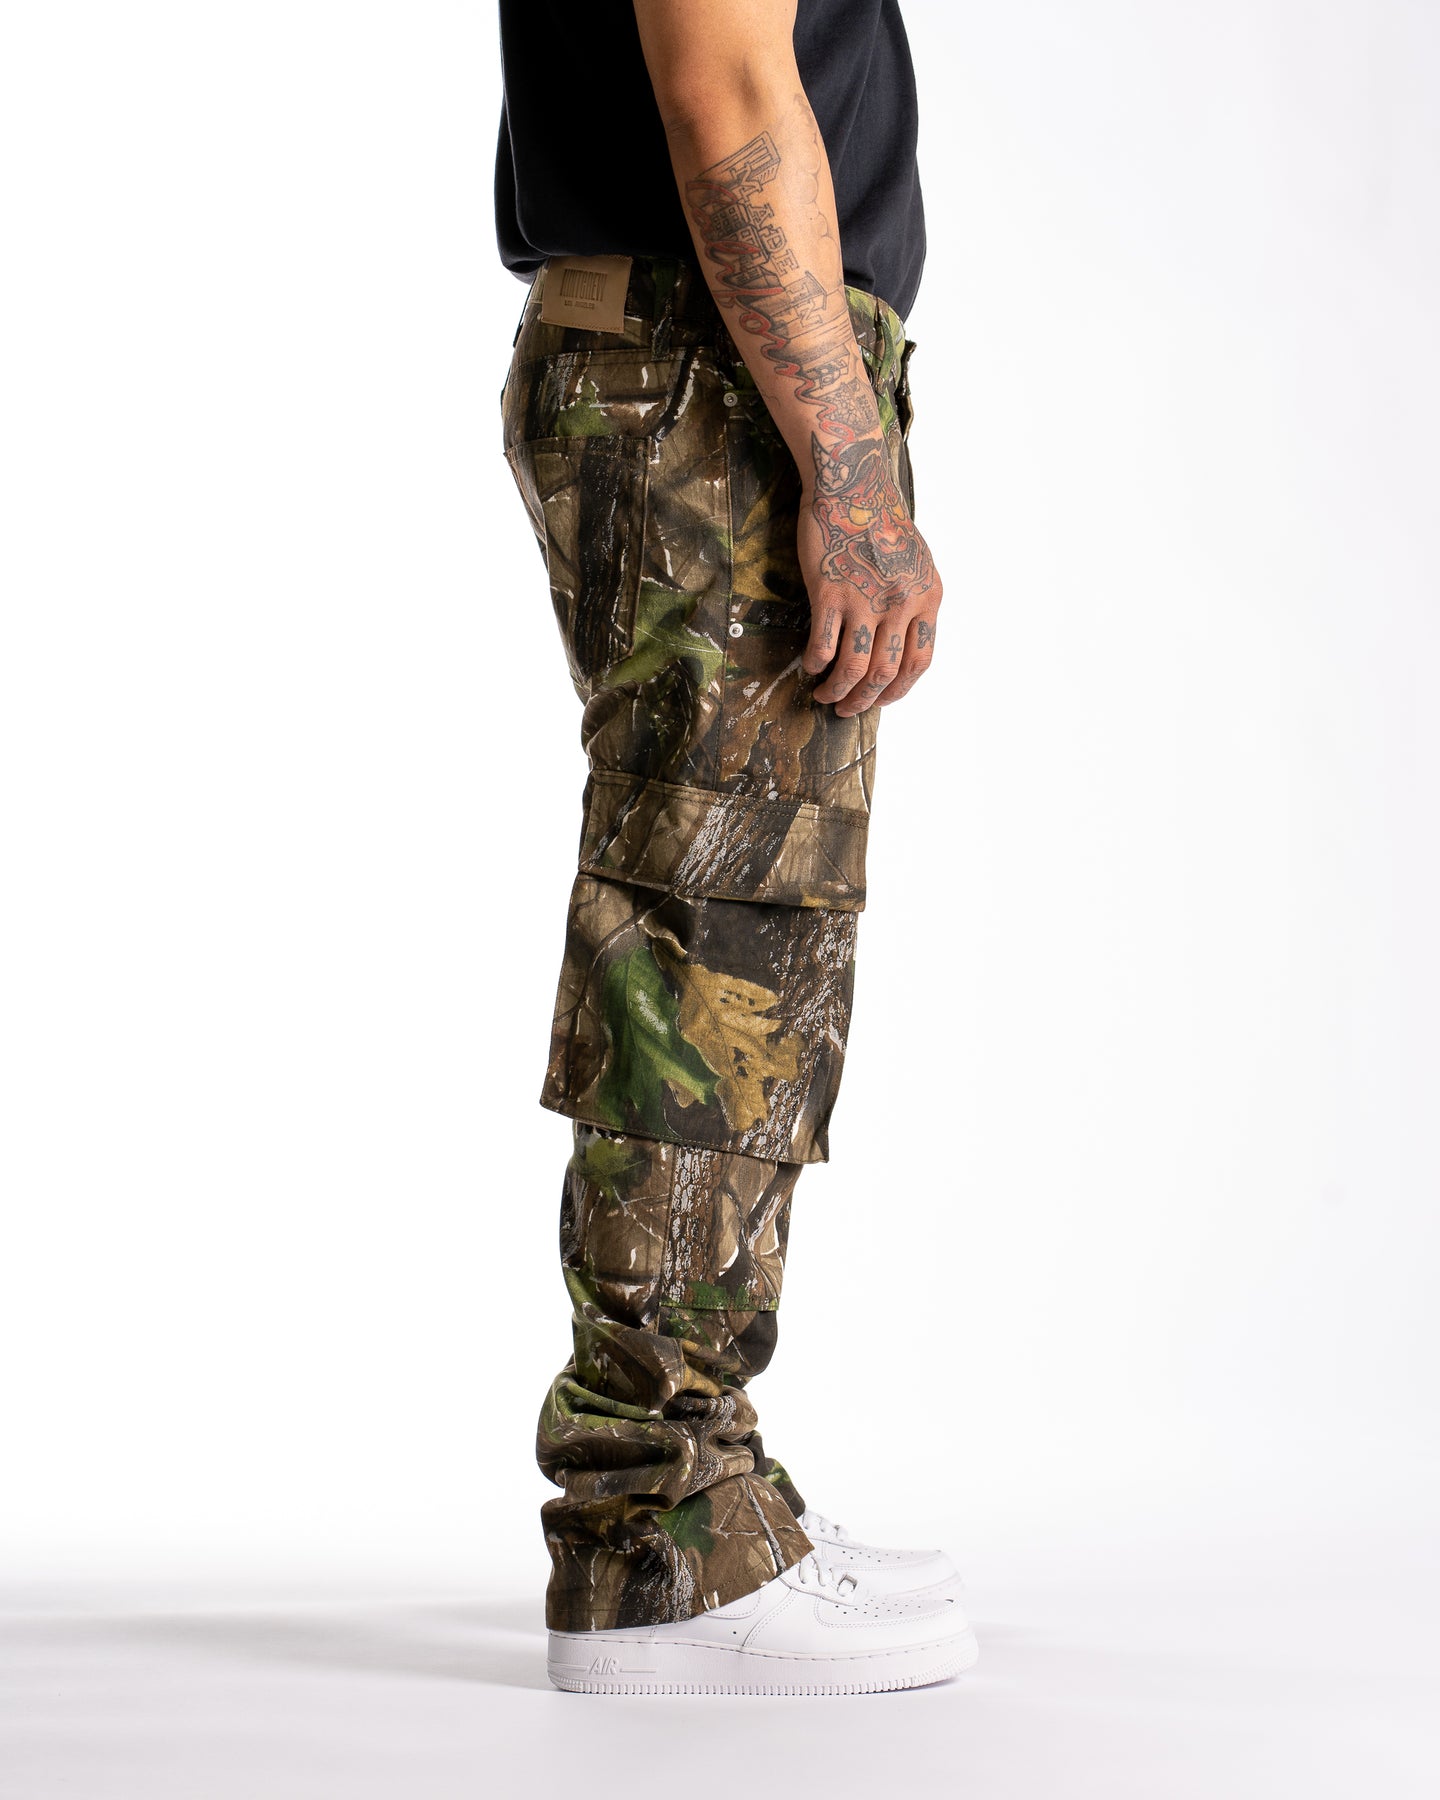 REALTREE APG DOUBLE KNEE CARGO PANT